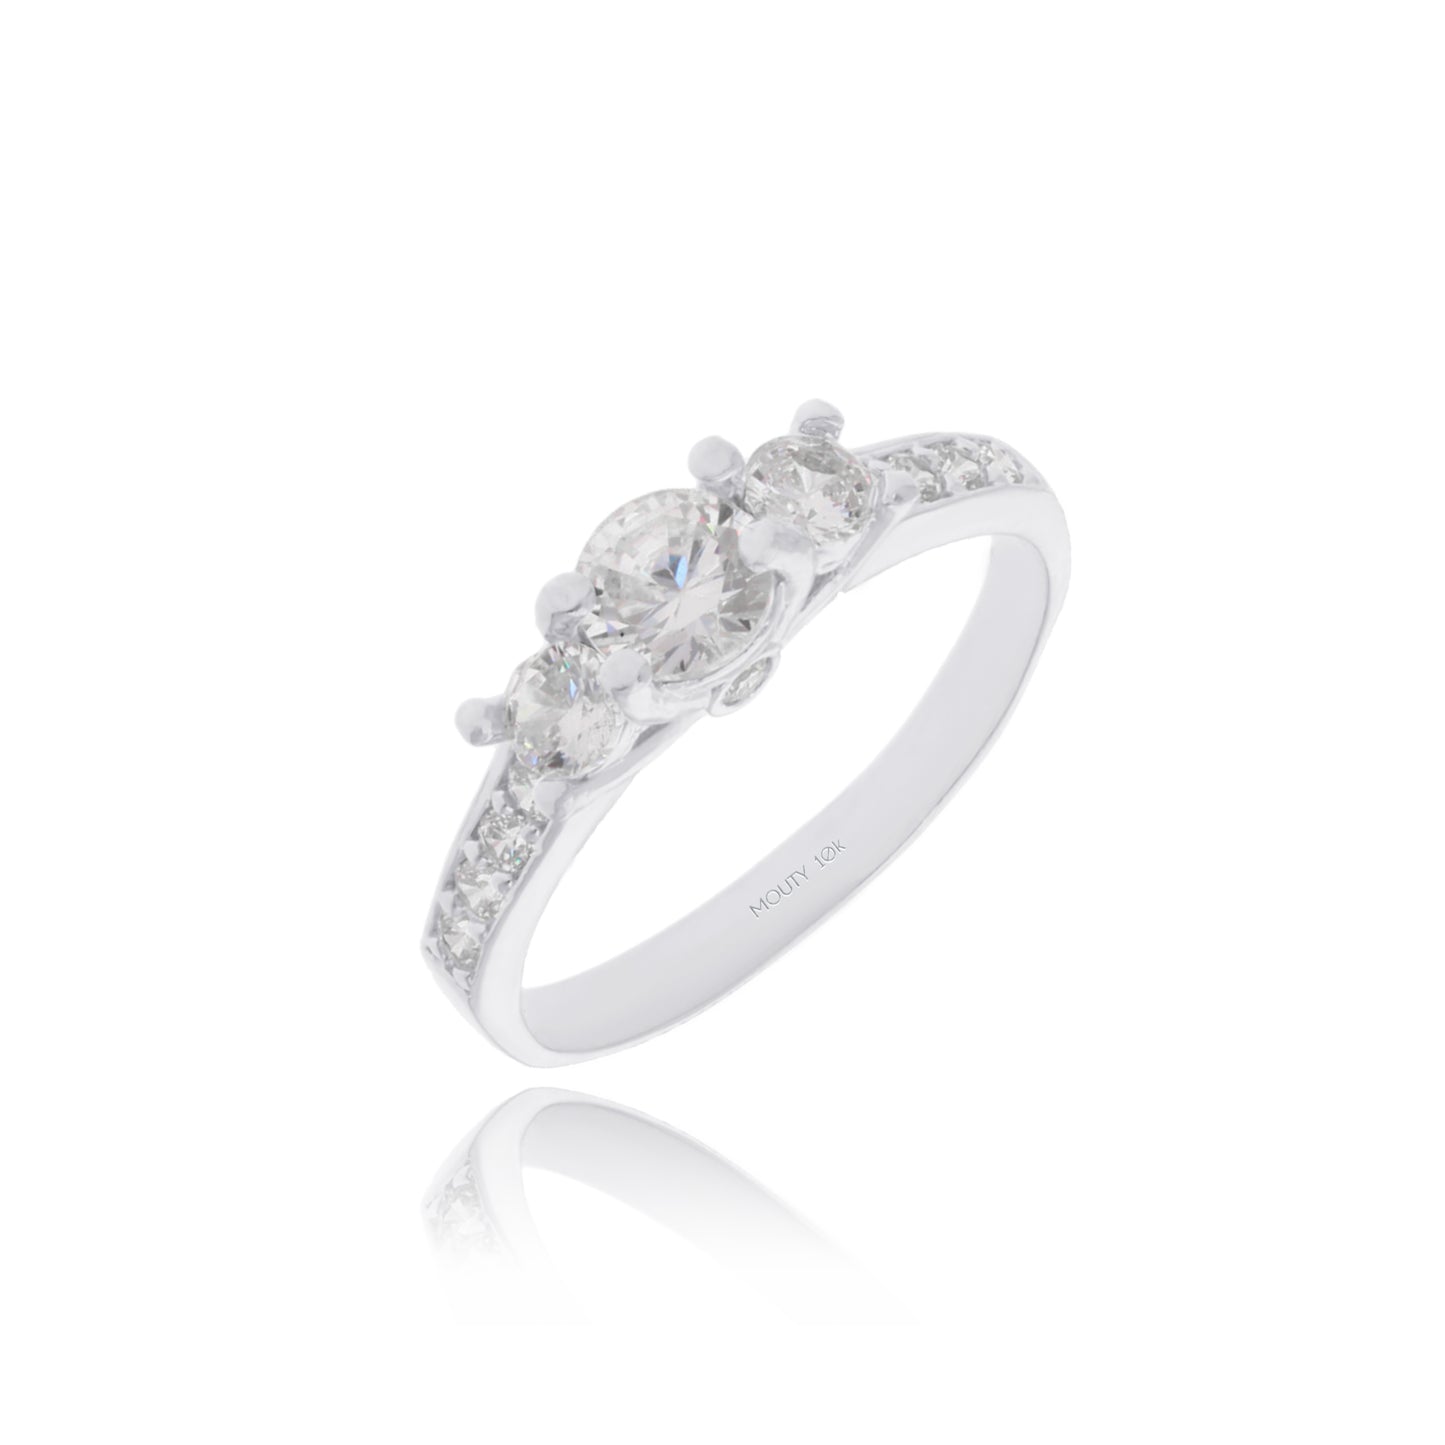 Cielo Ring in 10k white Gold with White Zirconia